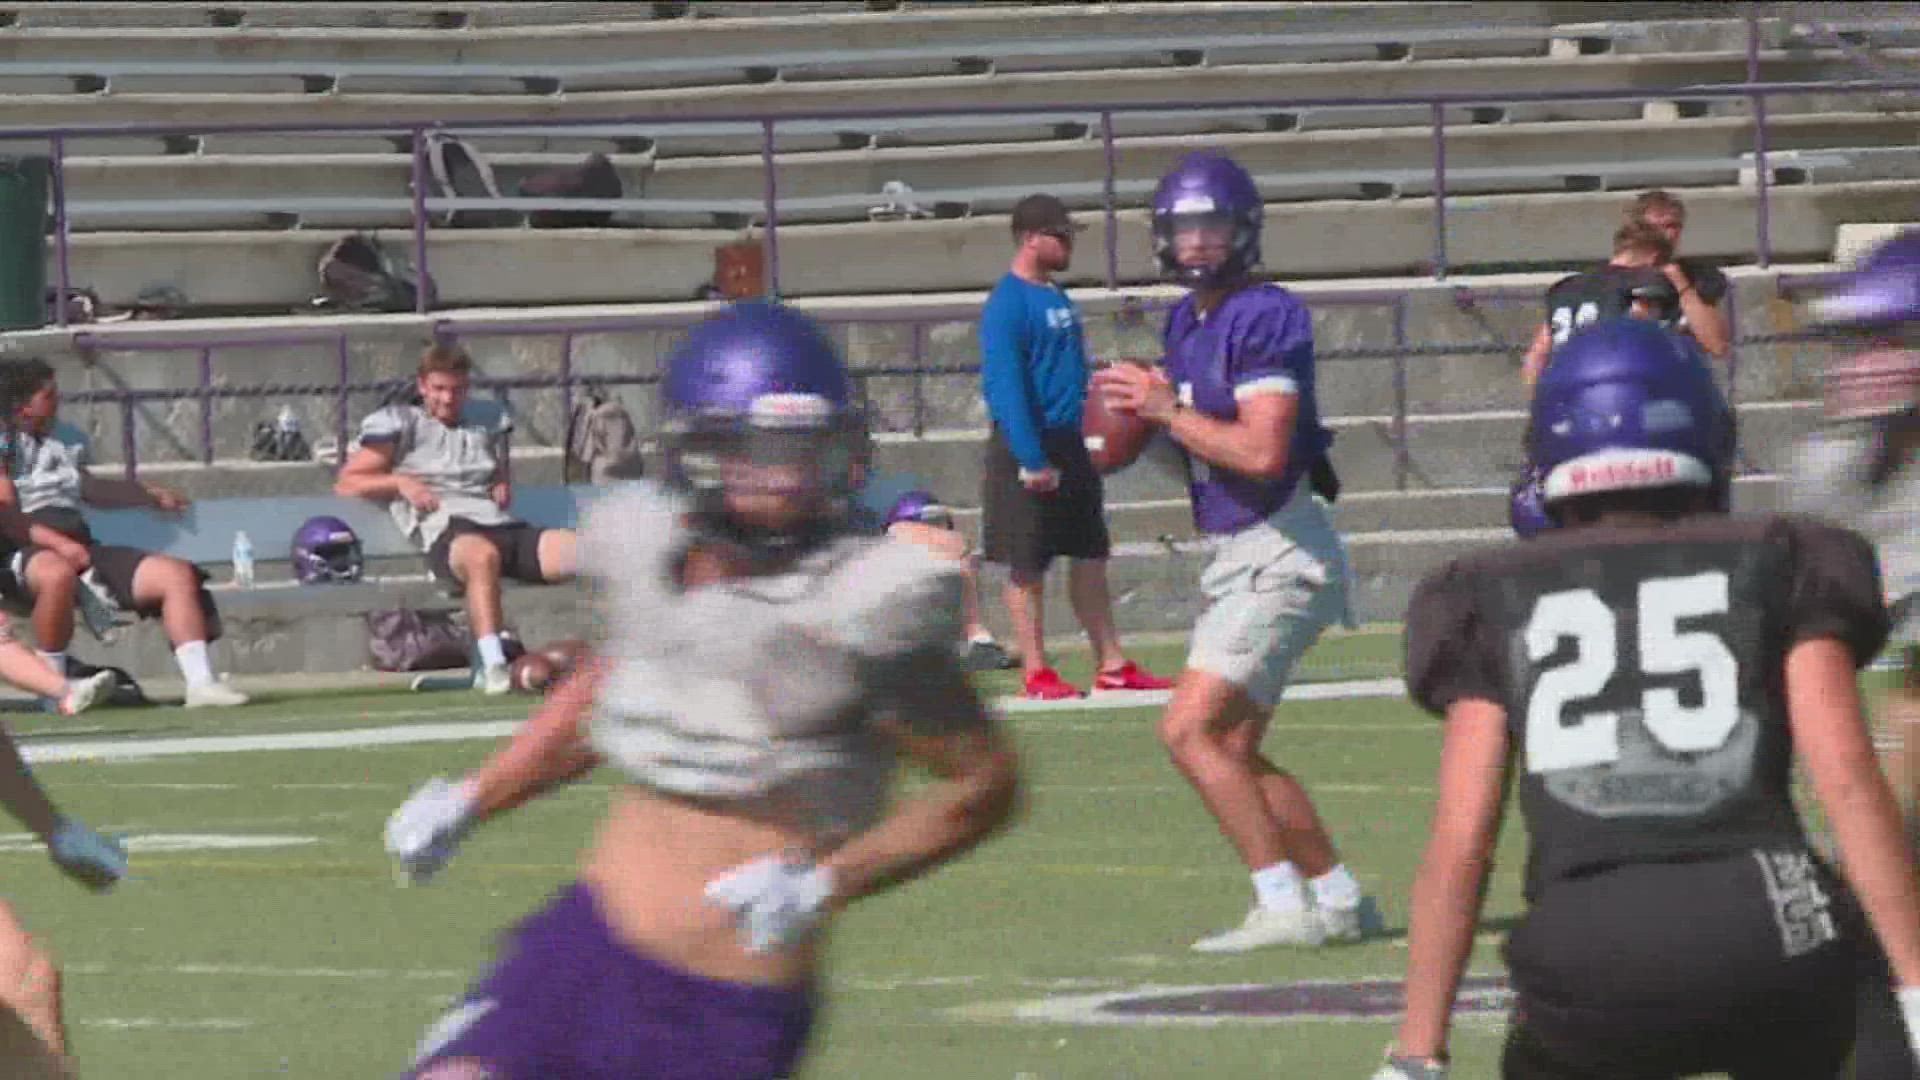 As the season begins, the Yotes have picked two quarterbacks: Ryan Hibbs and Andy Peters.